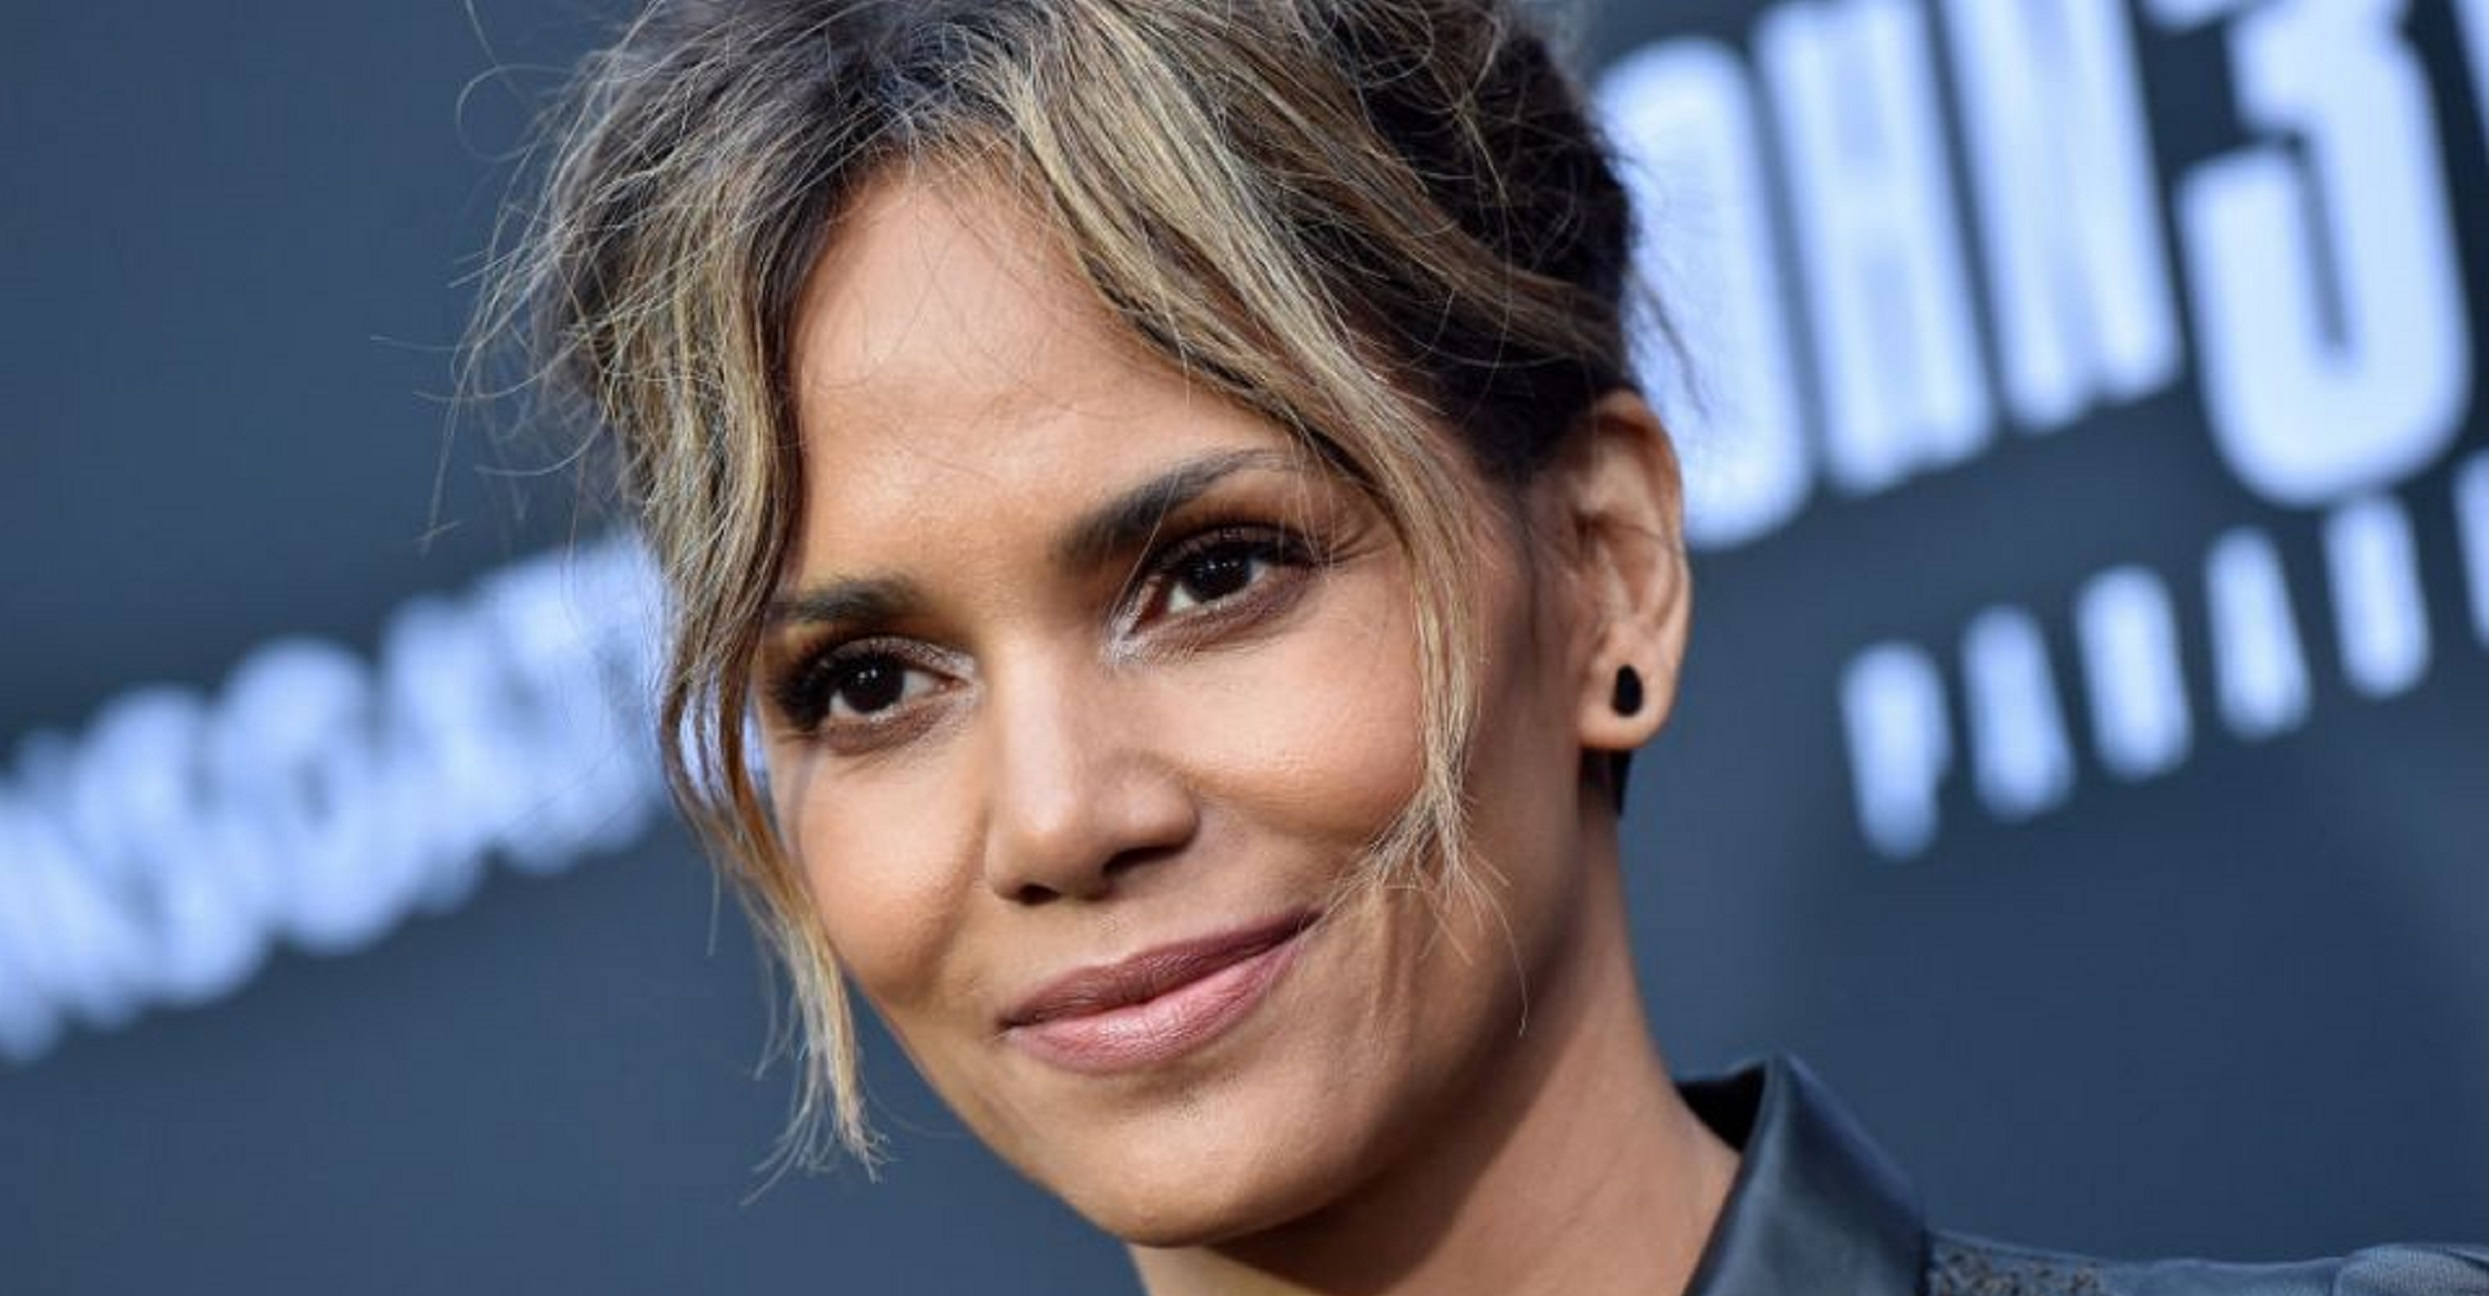 Halle Berry Says It’s a Sin To Date Your Friend’s Ex, “That’s Just Not Cool”